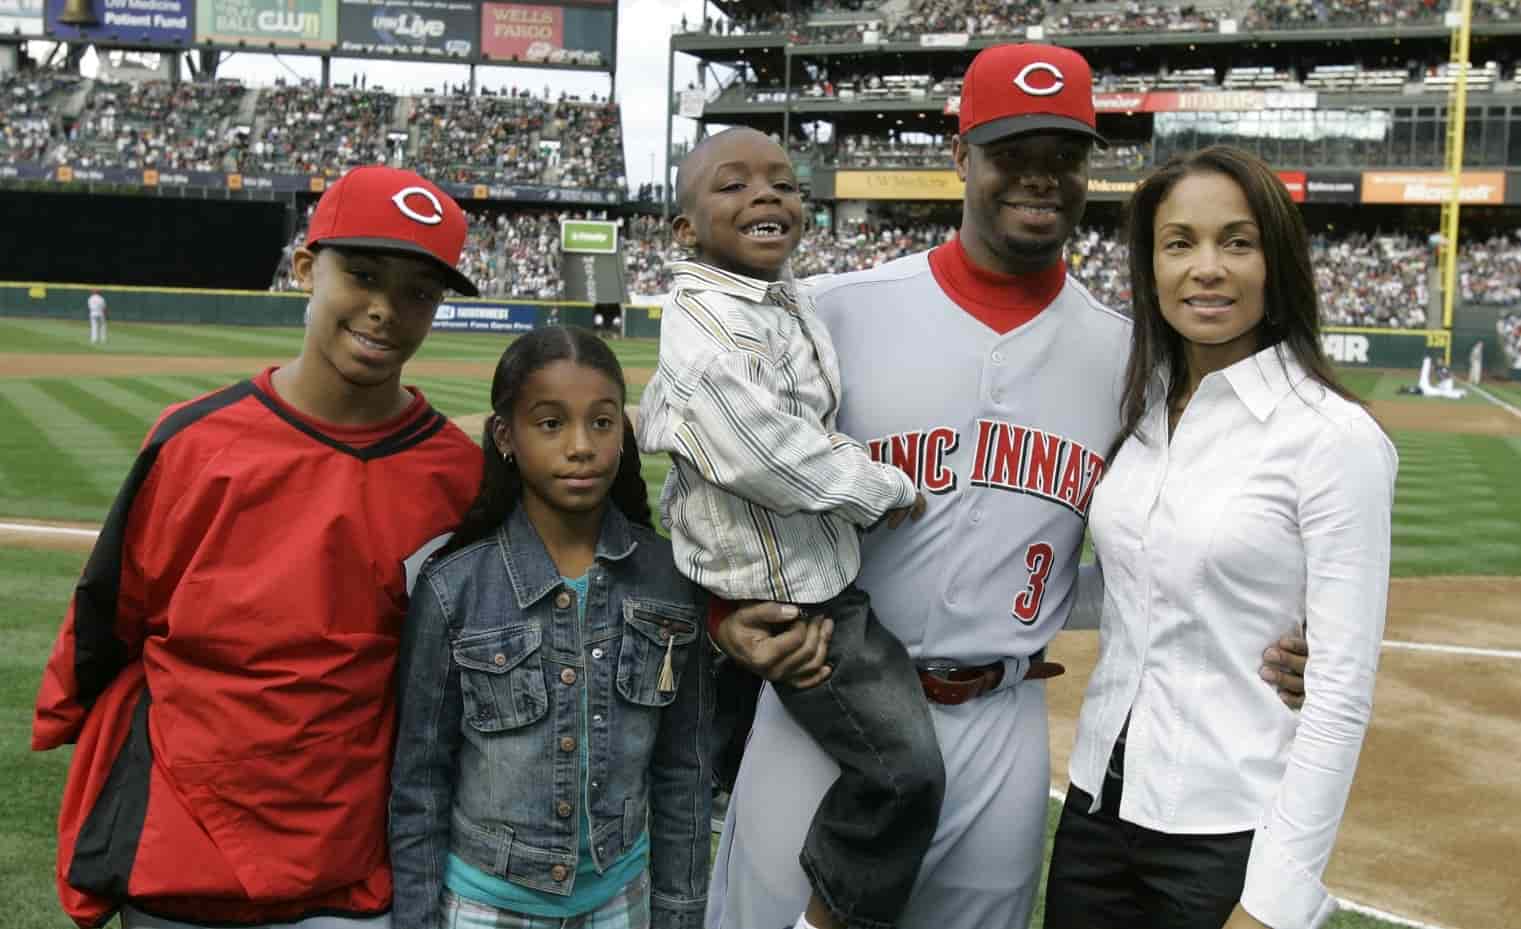 Image of Ken Griffey, Jr. and Melissa Griffey with their kids, Ken Griffey III, Taryn Kennedy Griffey, and Tevin Kendall Griffey